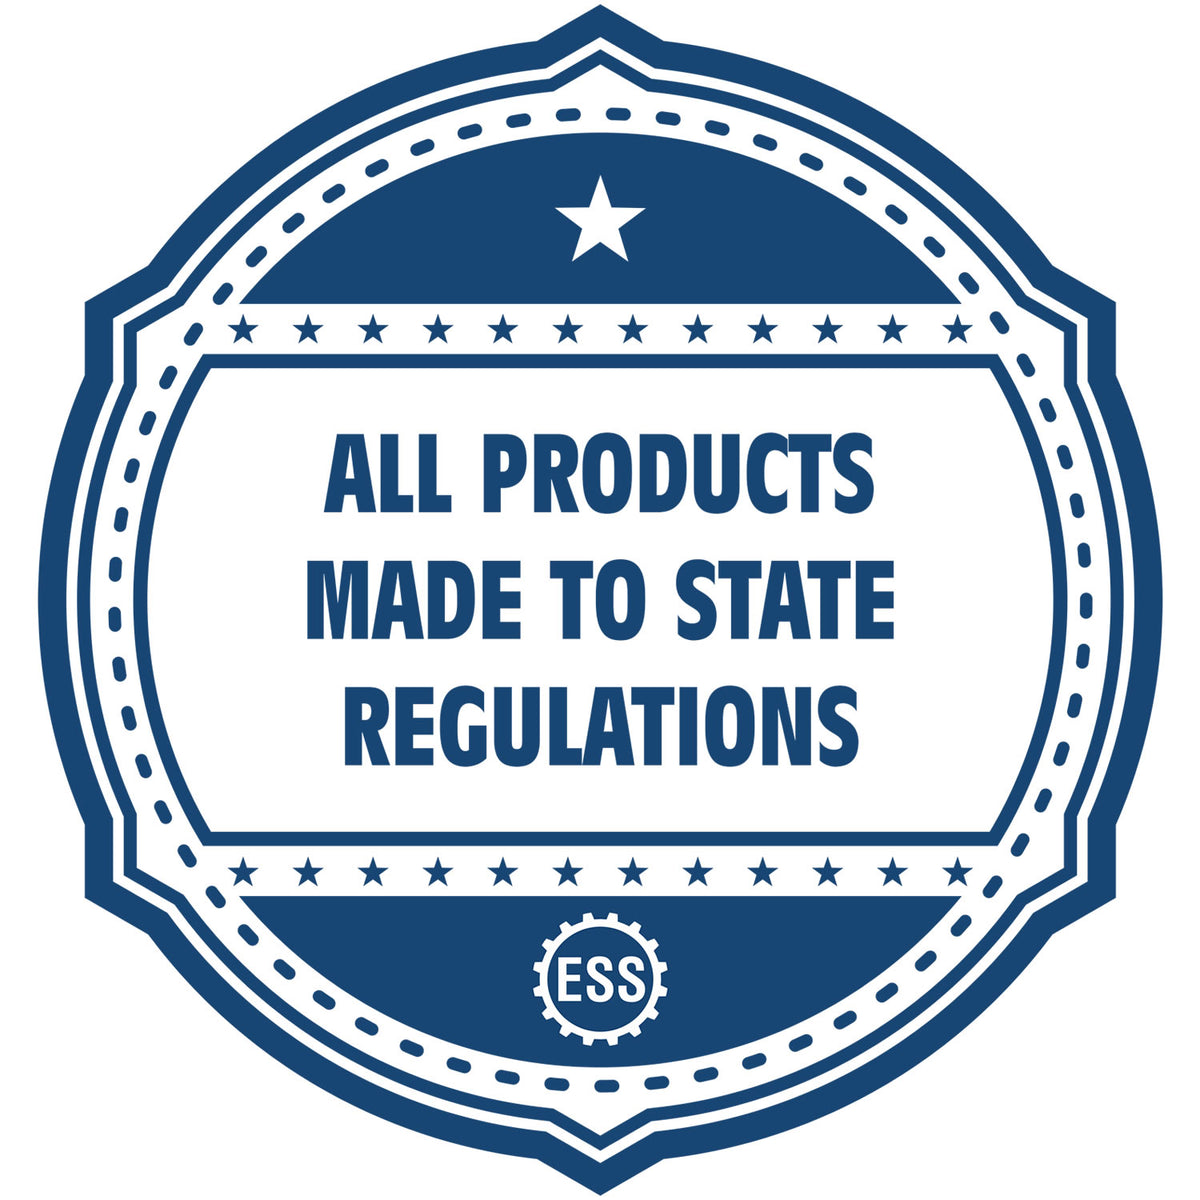 An icon or badge element for the Digital Arizona PE Stamp and Electronic Seal for Arizona Engineer showing that this product is made in compliance with state regulations.